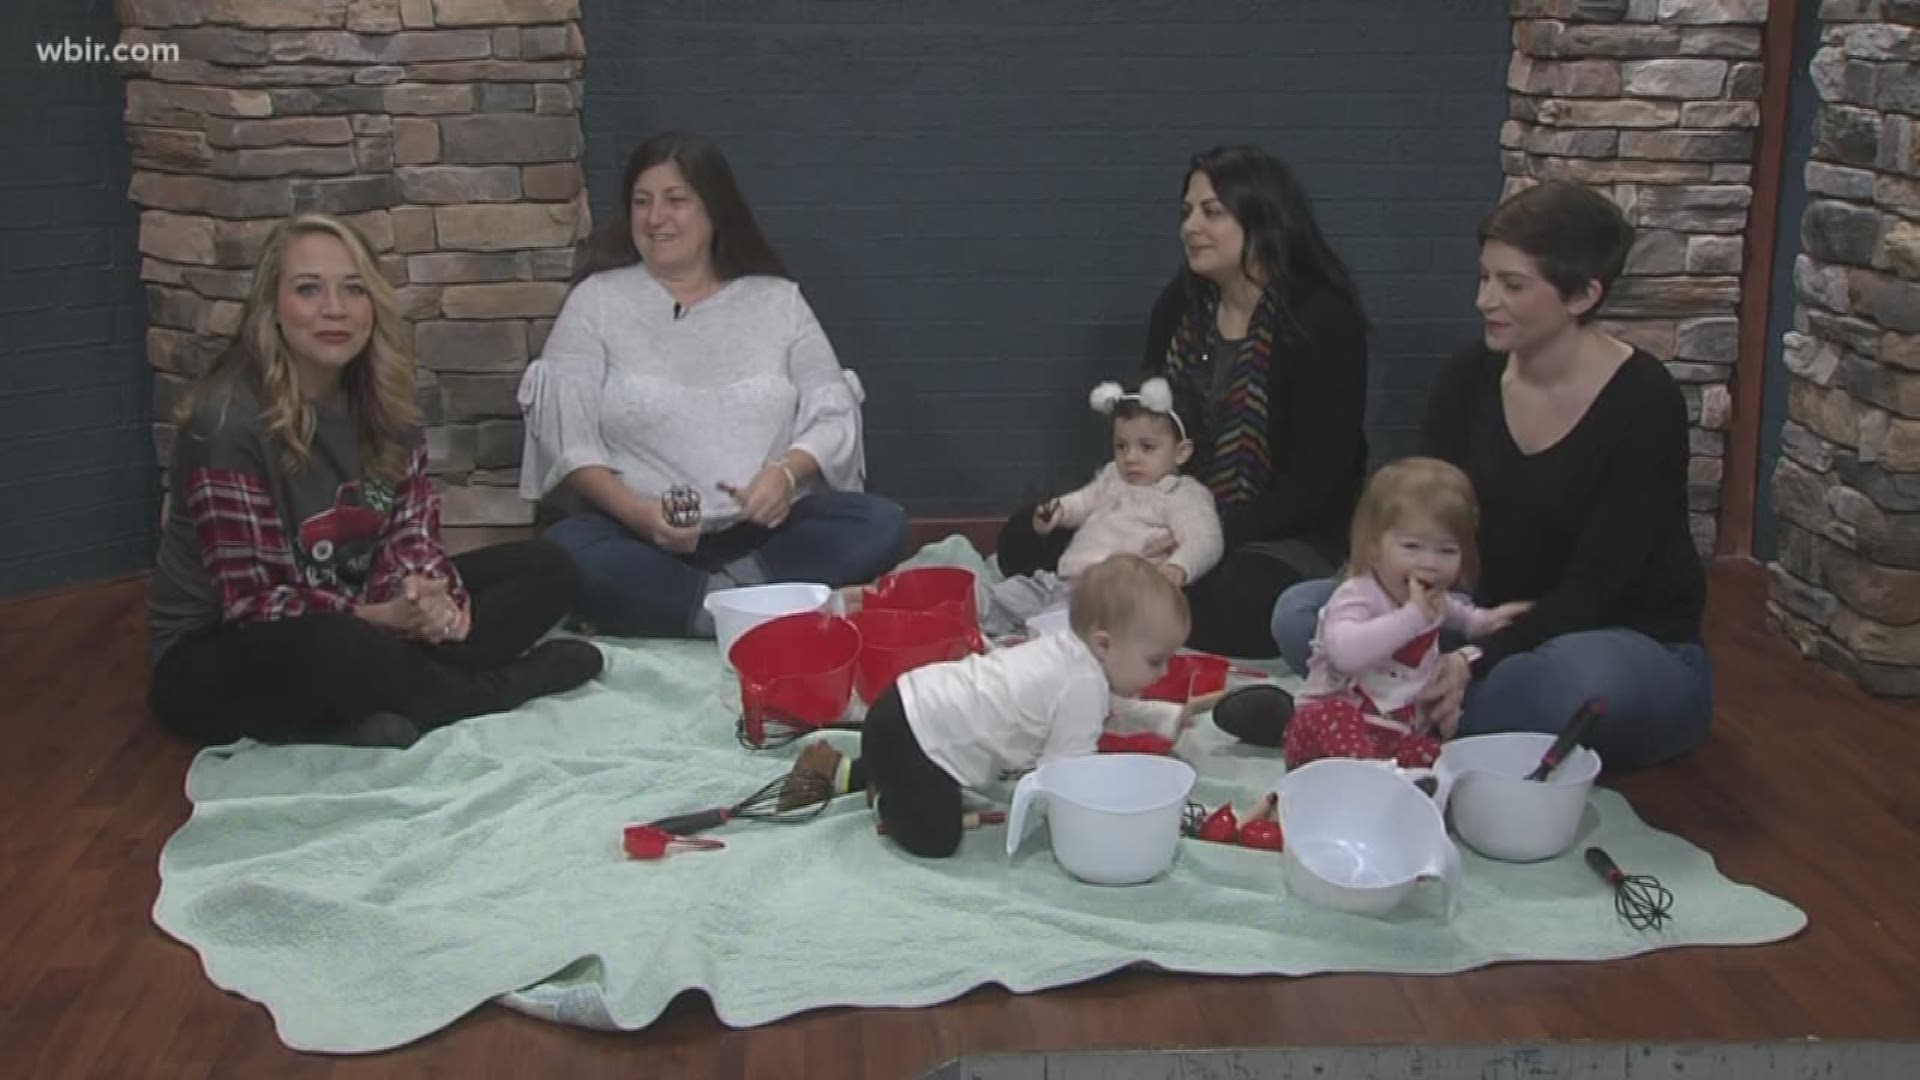 Knoxville KinderMusik shares how to use household items to entertain your kids during the winter break.